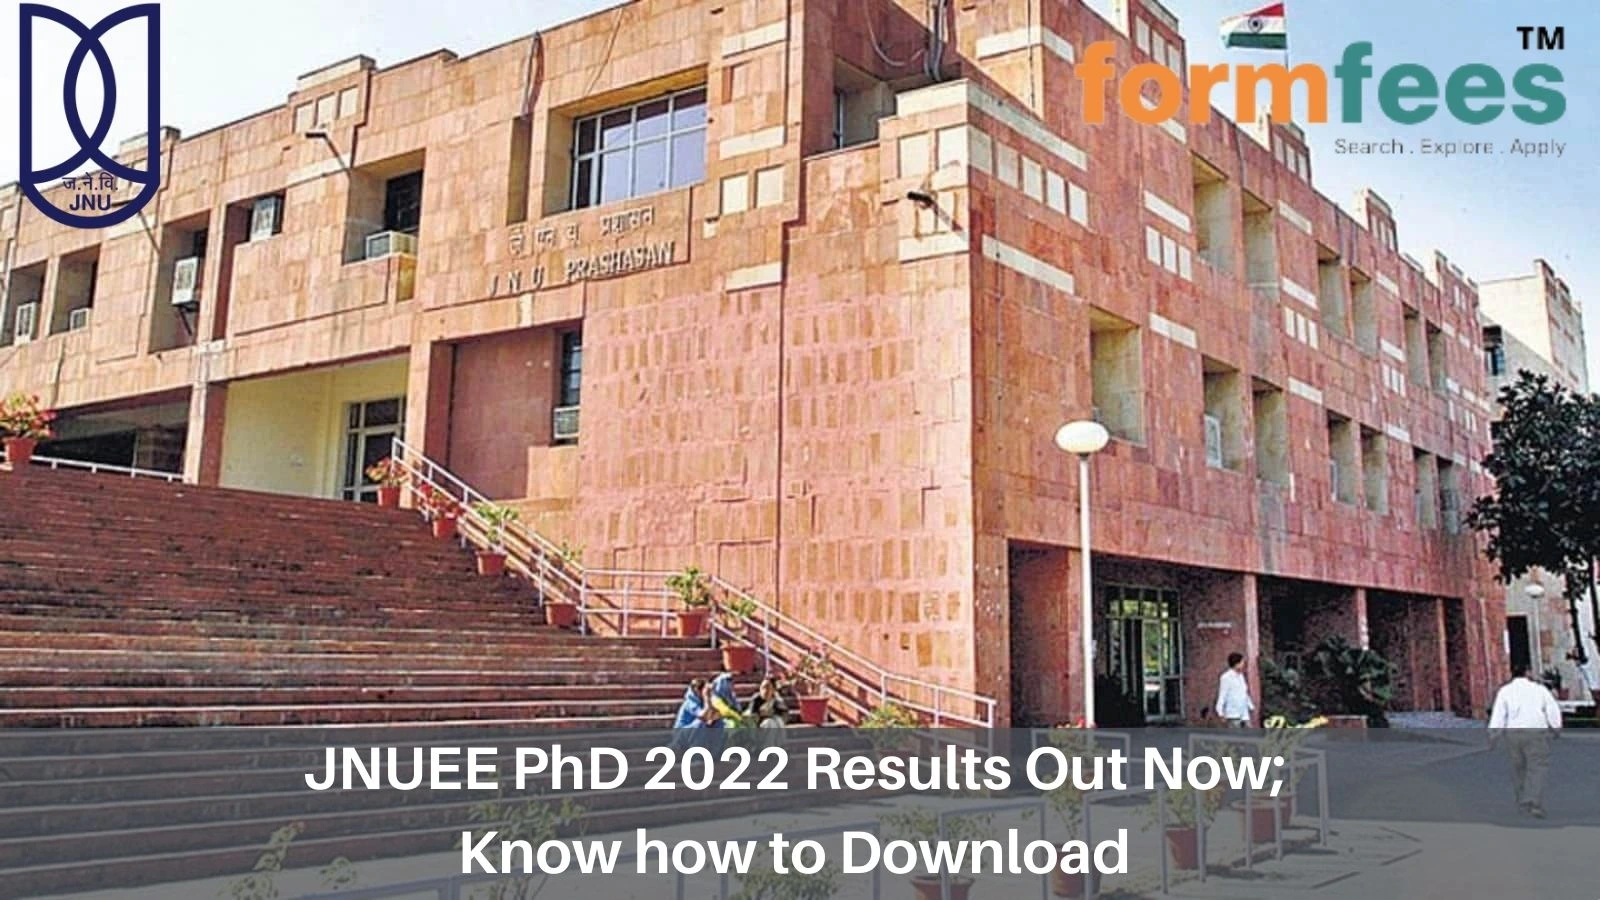 JNUEE PhD 2022 Results Out Now; Know how to Download